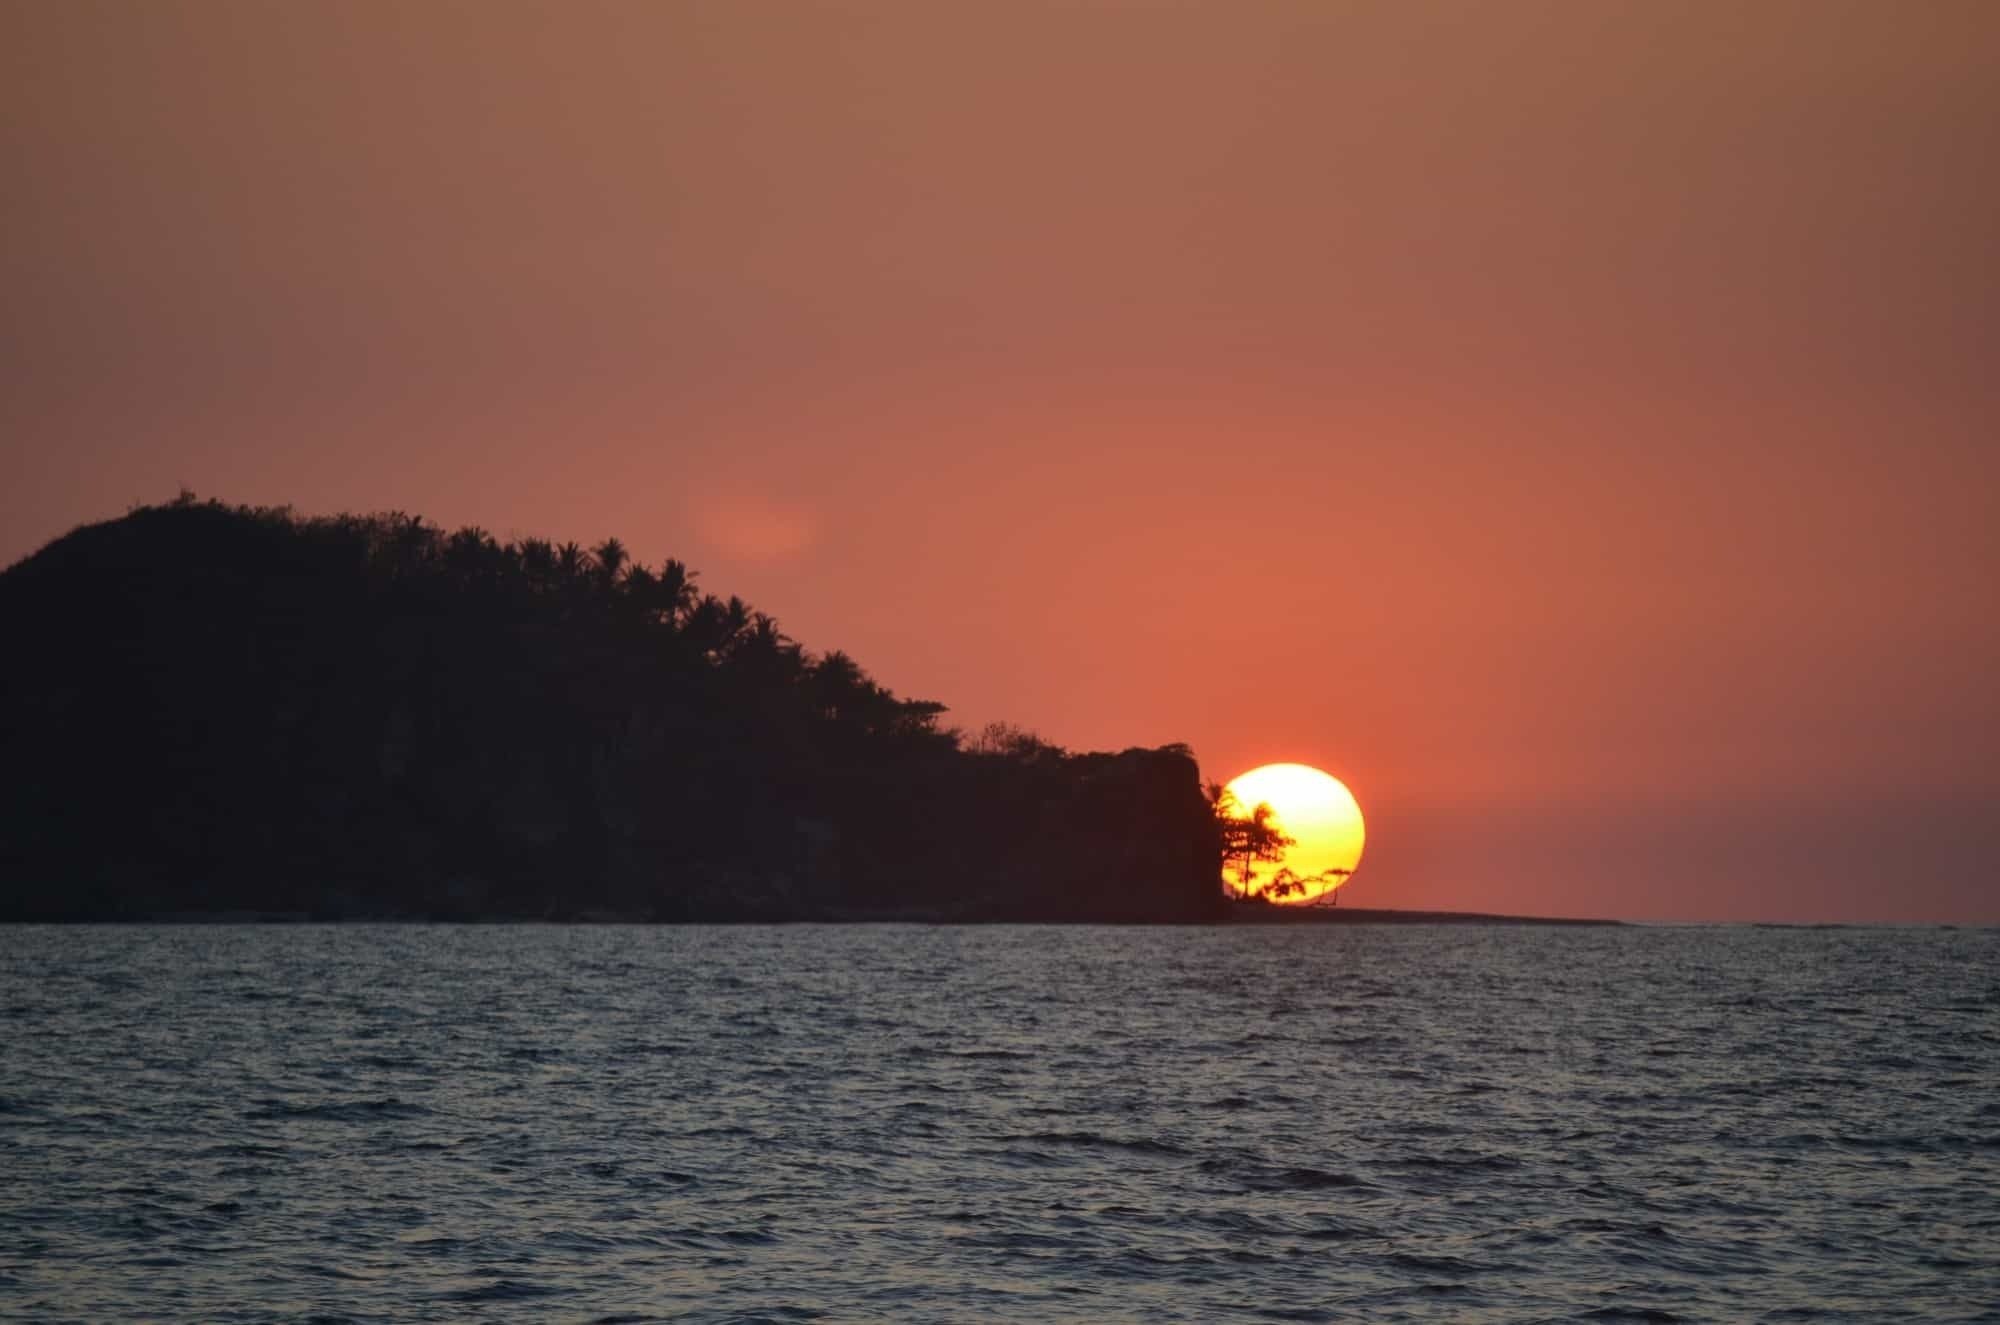 the sun is setting over a small island in the middle of the ocean